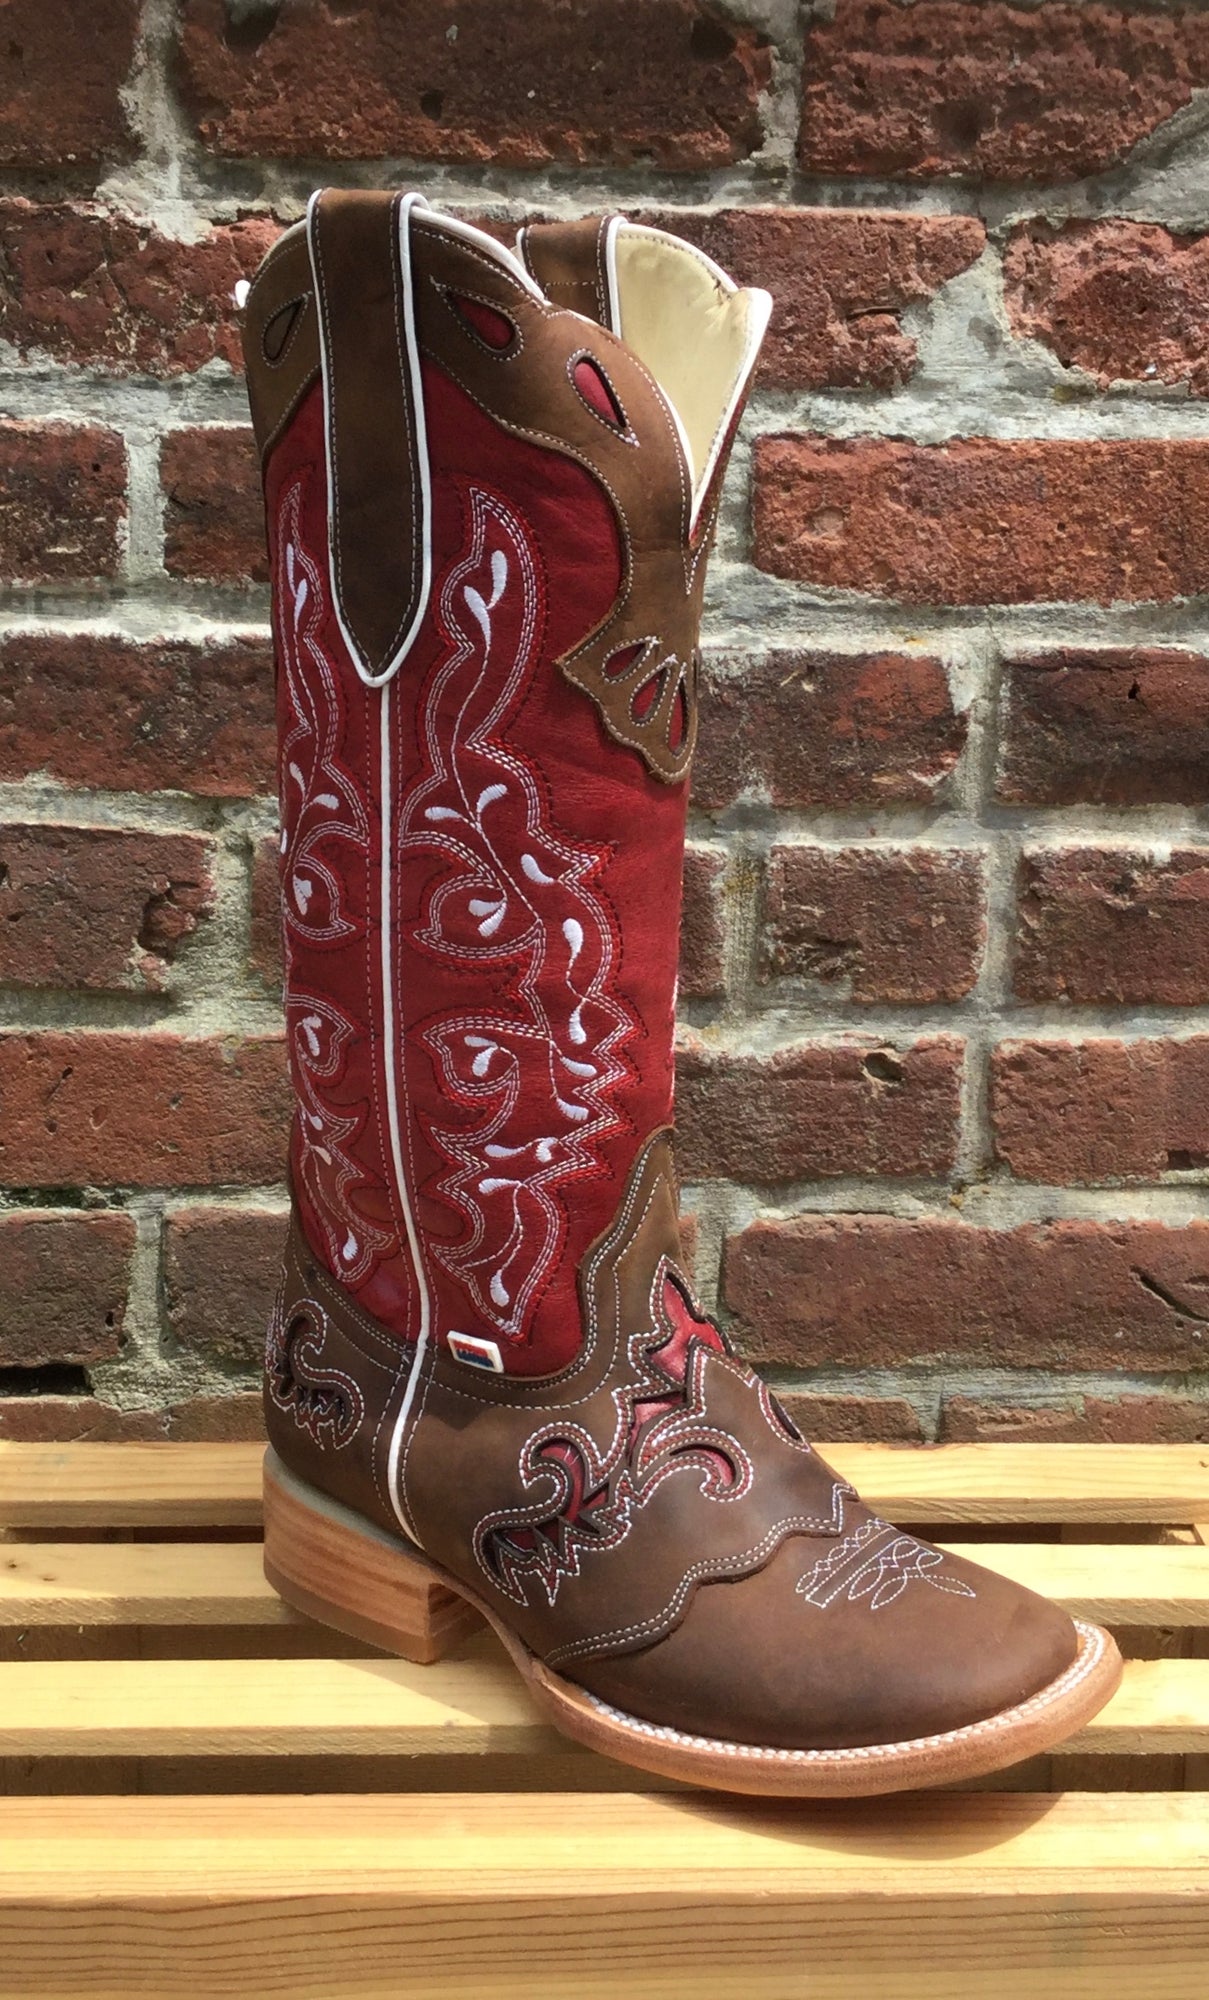 tall red leather boots